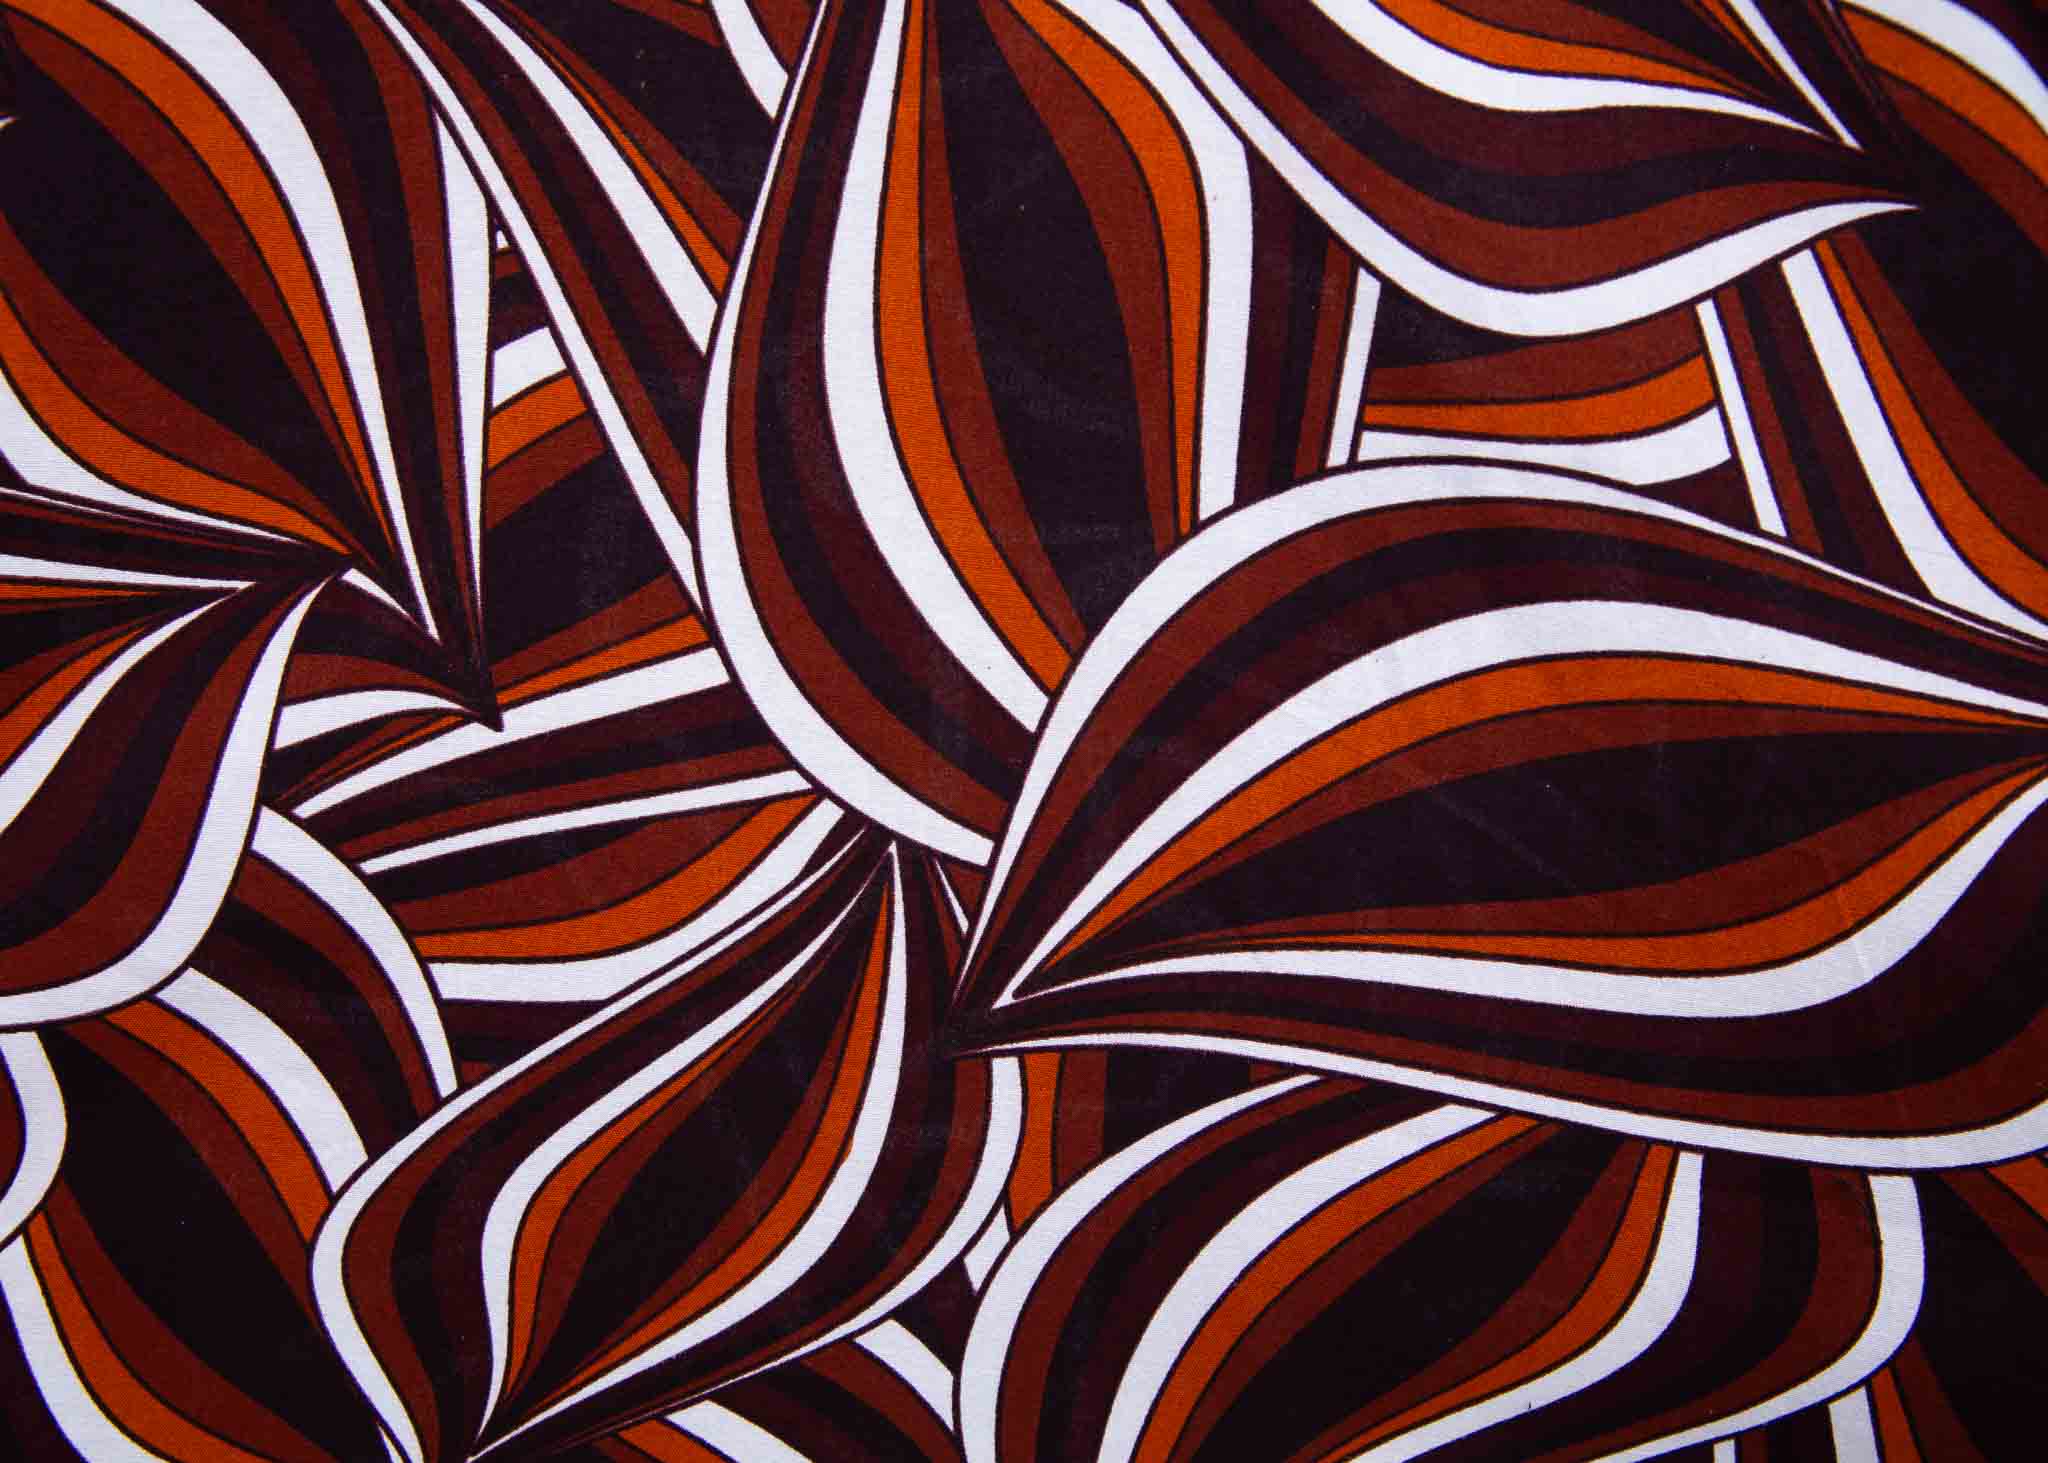 Display of brown, orange, and white abstract print dress.